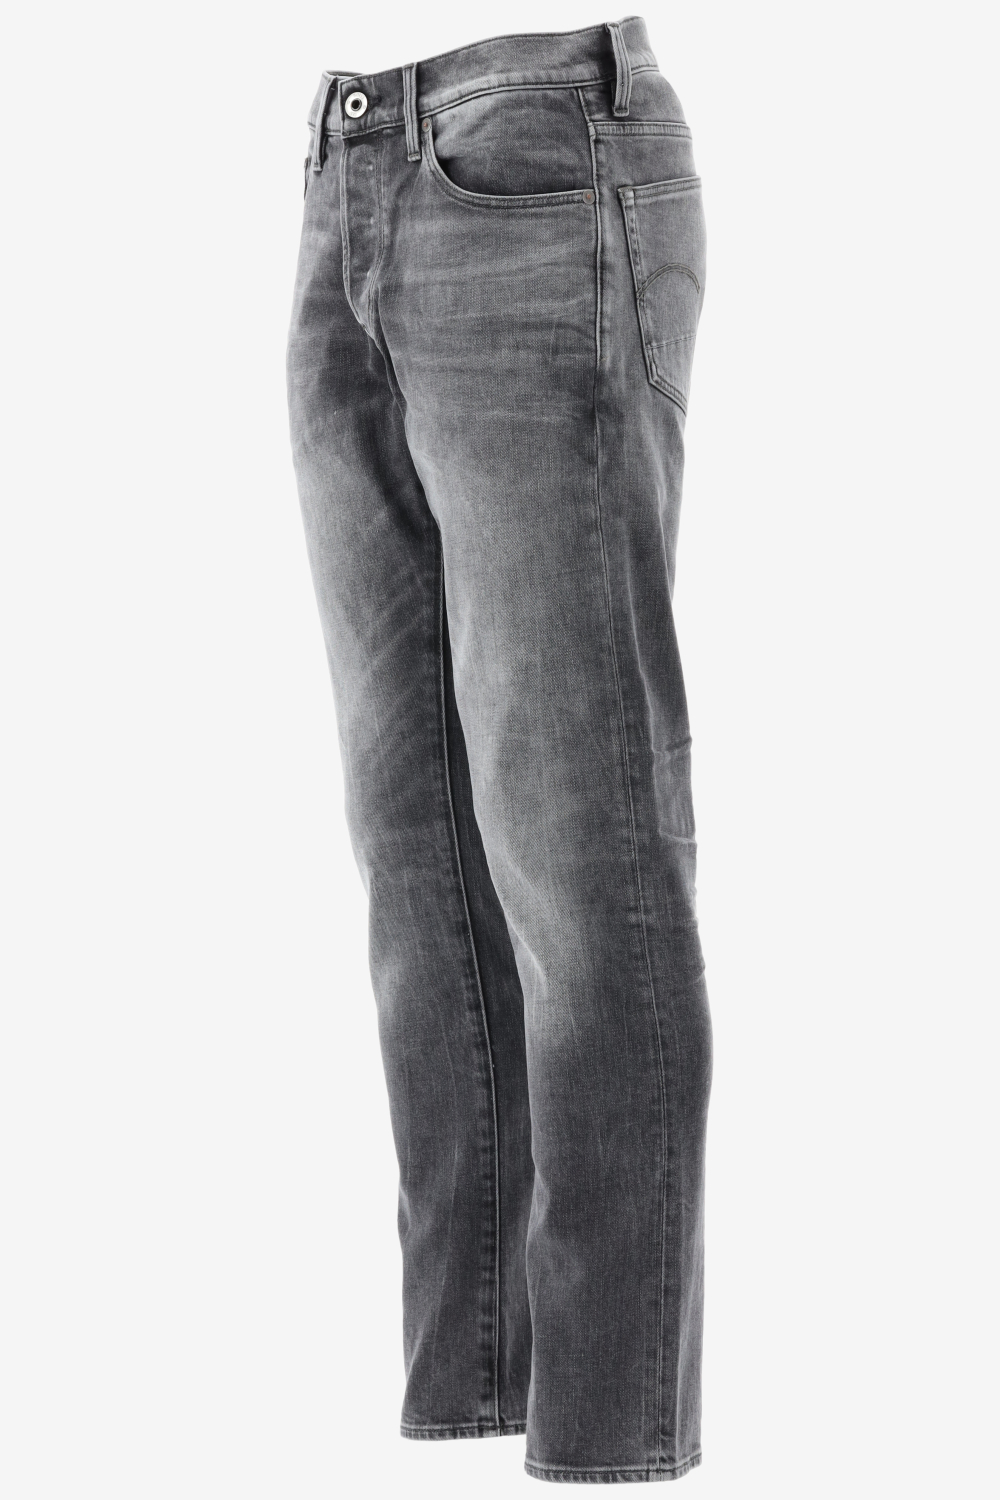 G-Star Tapered Fit 3301 REGULAR TAPERED 